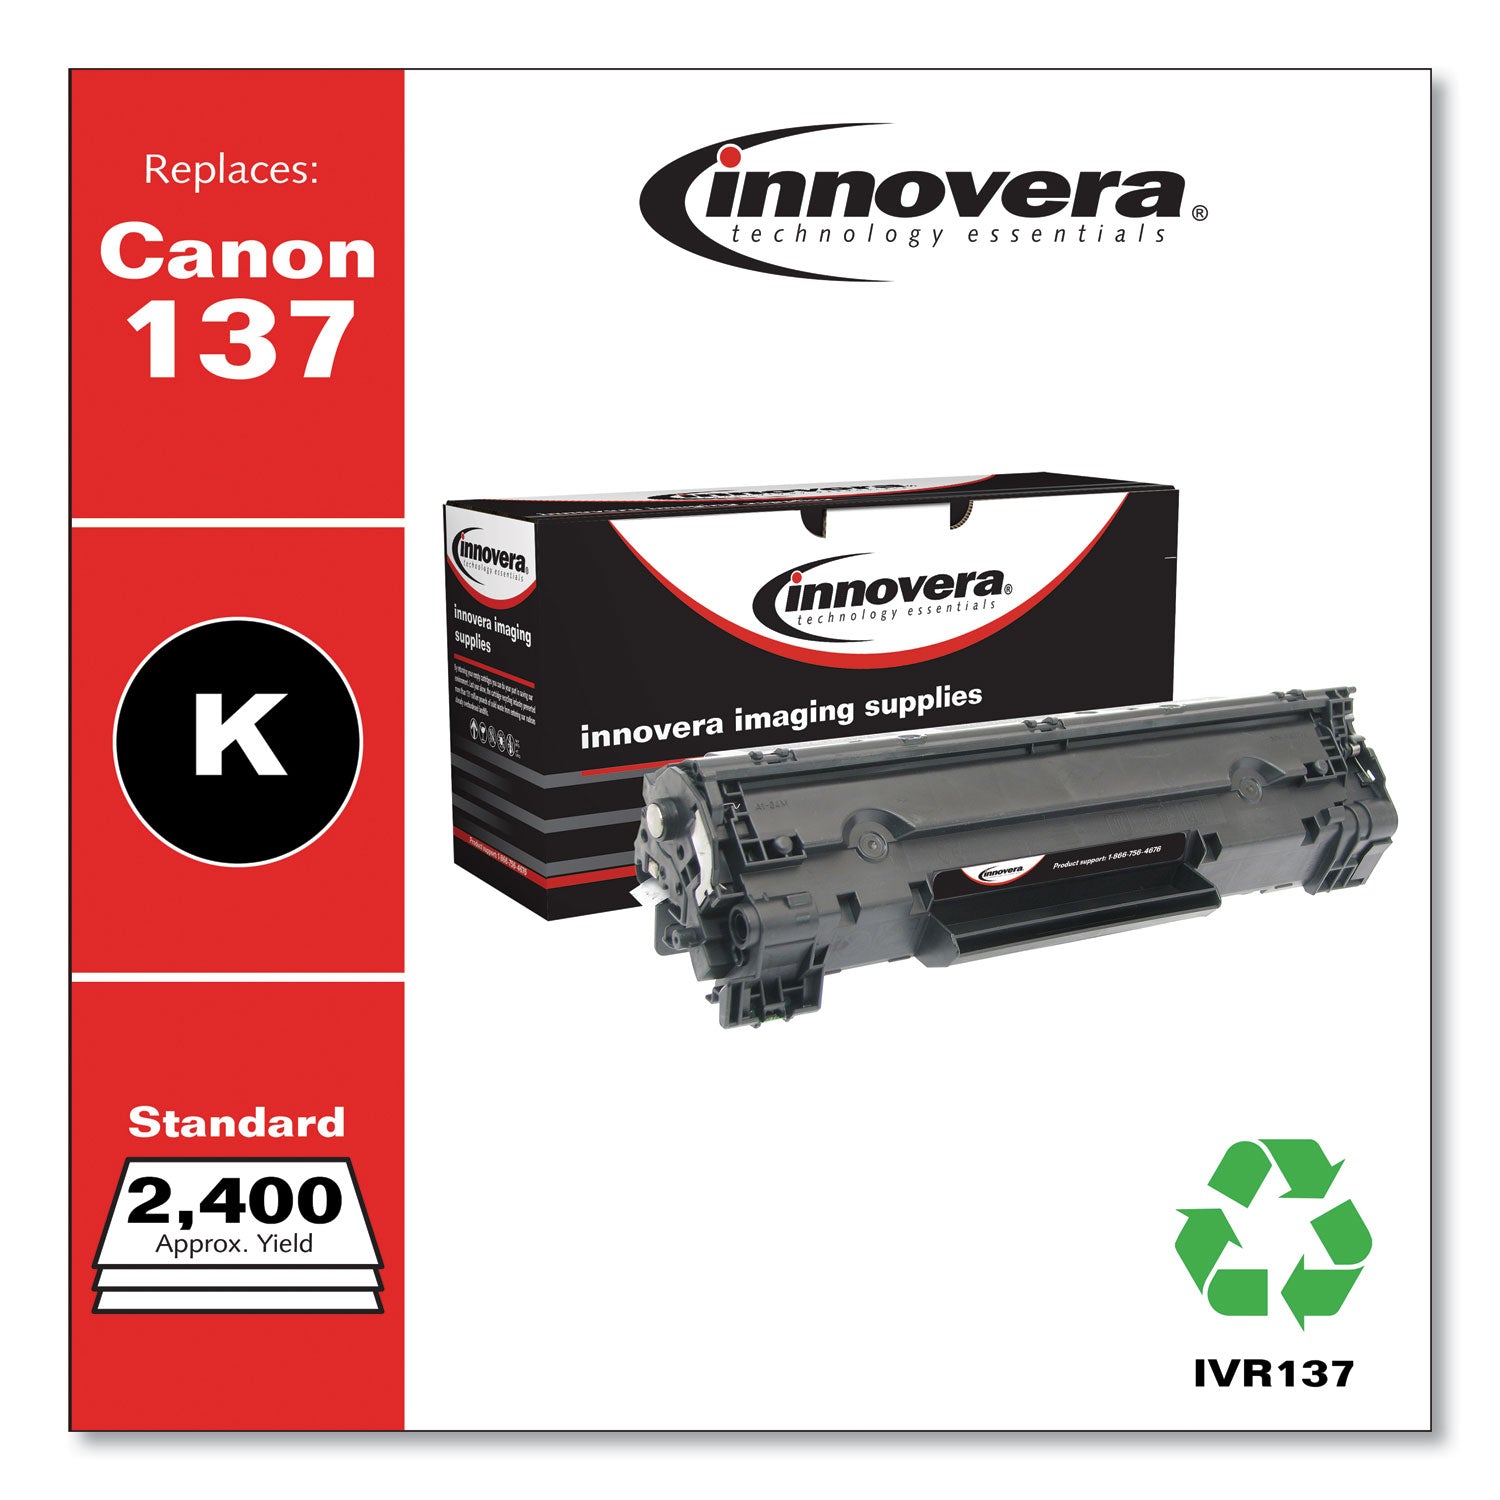 remanufactured-black-toner-replacement-for-137-9435b001aa-2400-page-yield_ivr137 - 2